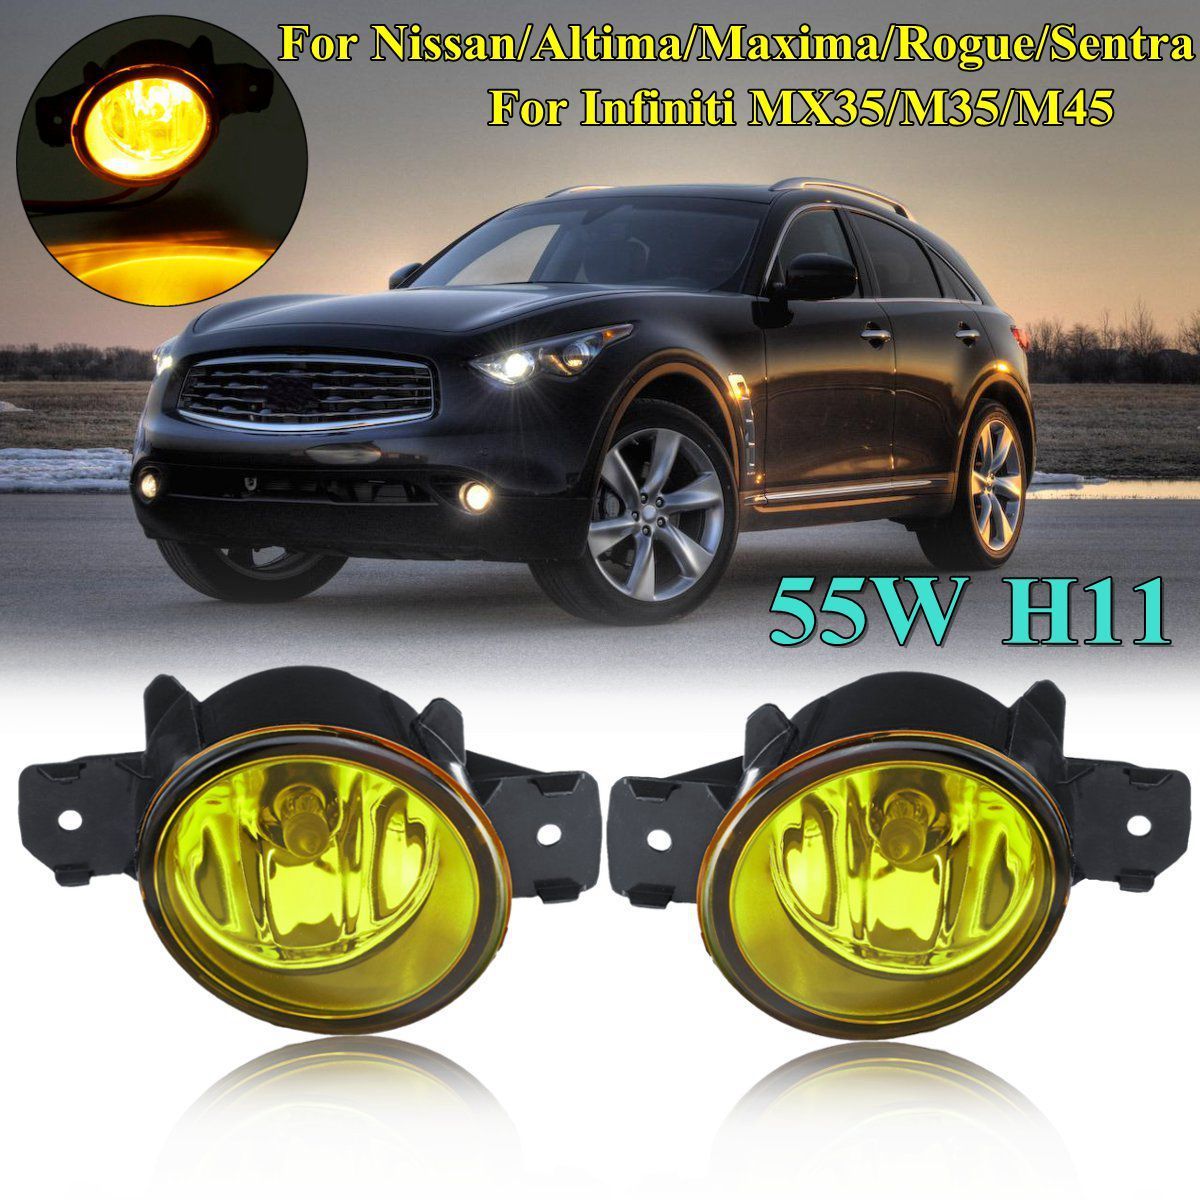 Car-Front-Bumper-Fog-Lights-Lamp-with-Bulbs-Amber-Pair-For-Nissan-Altima-Sentra-Infiniti-MX35M35M45-1417736